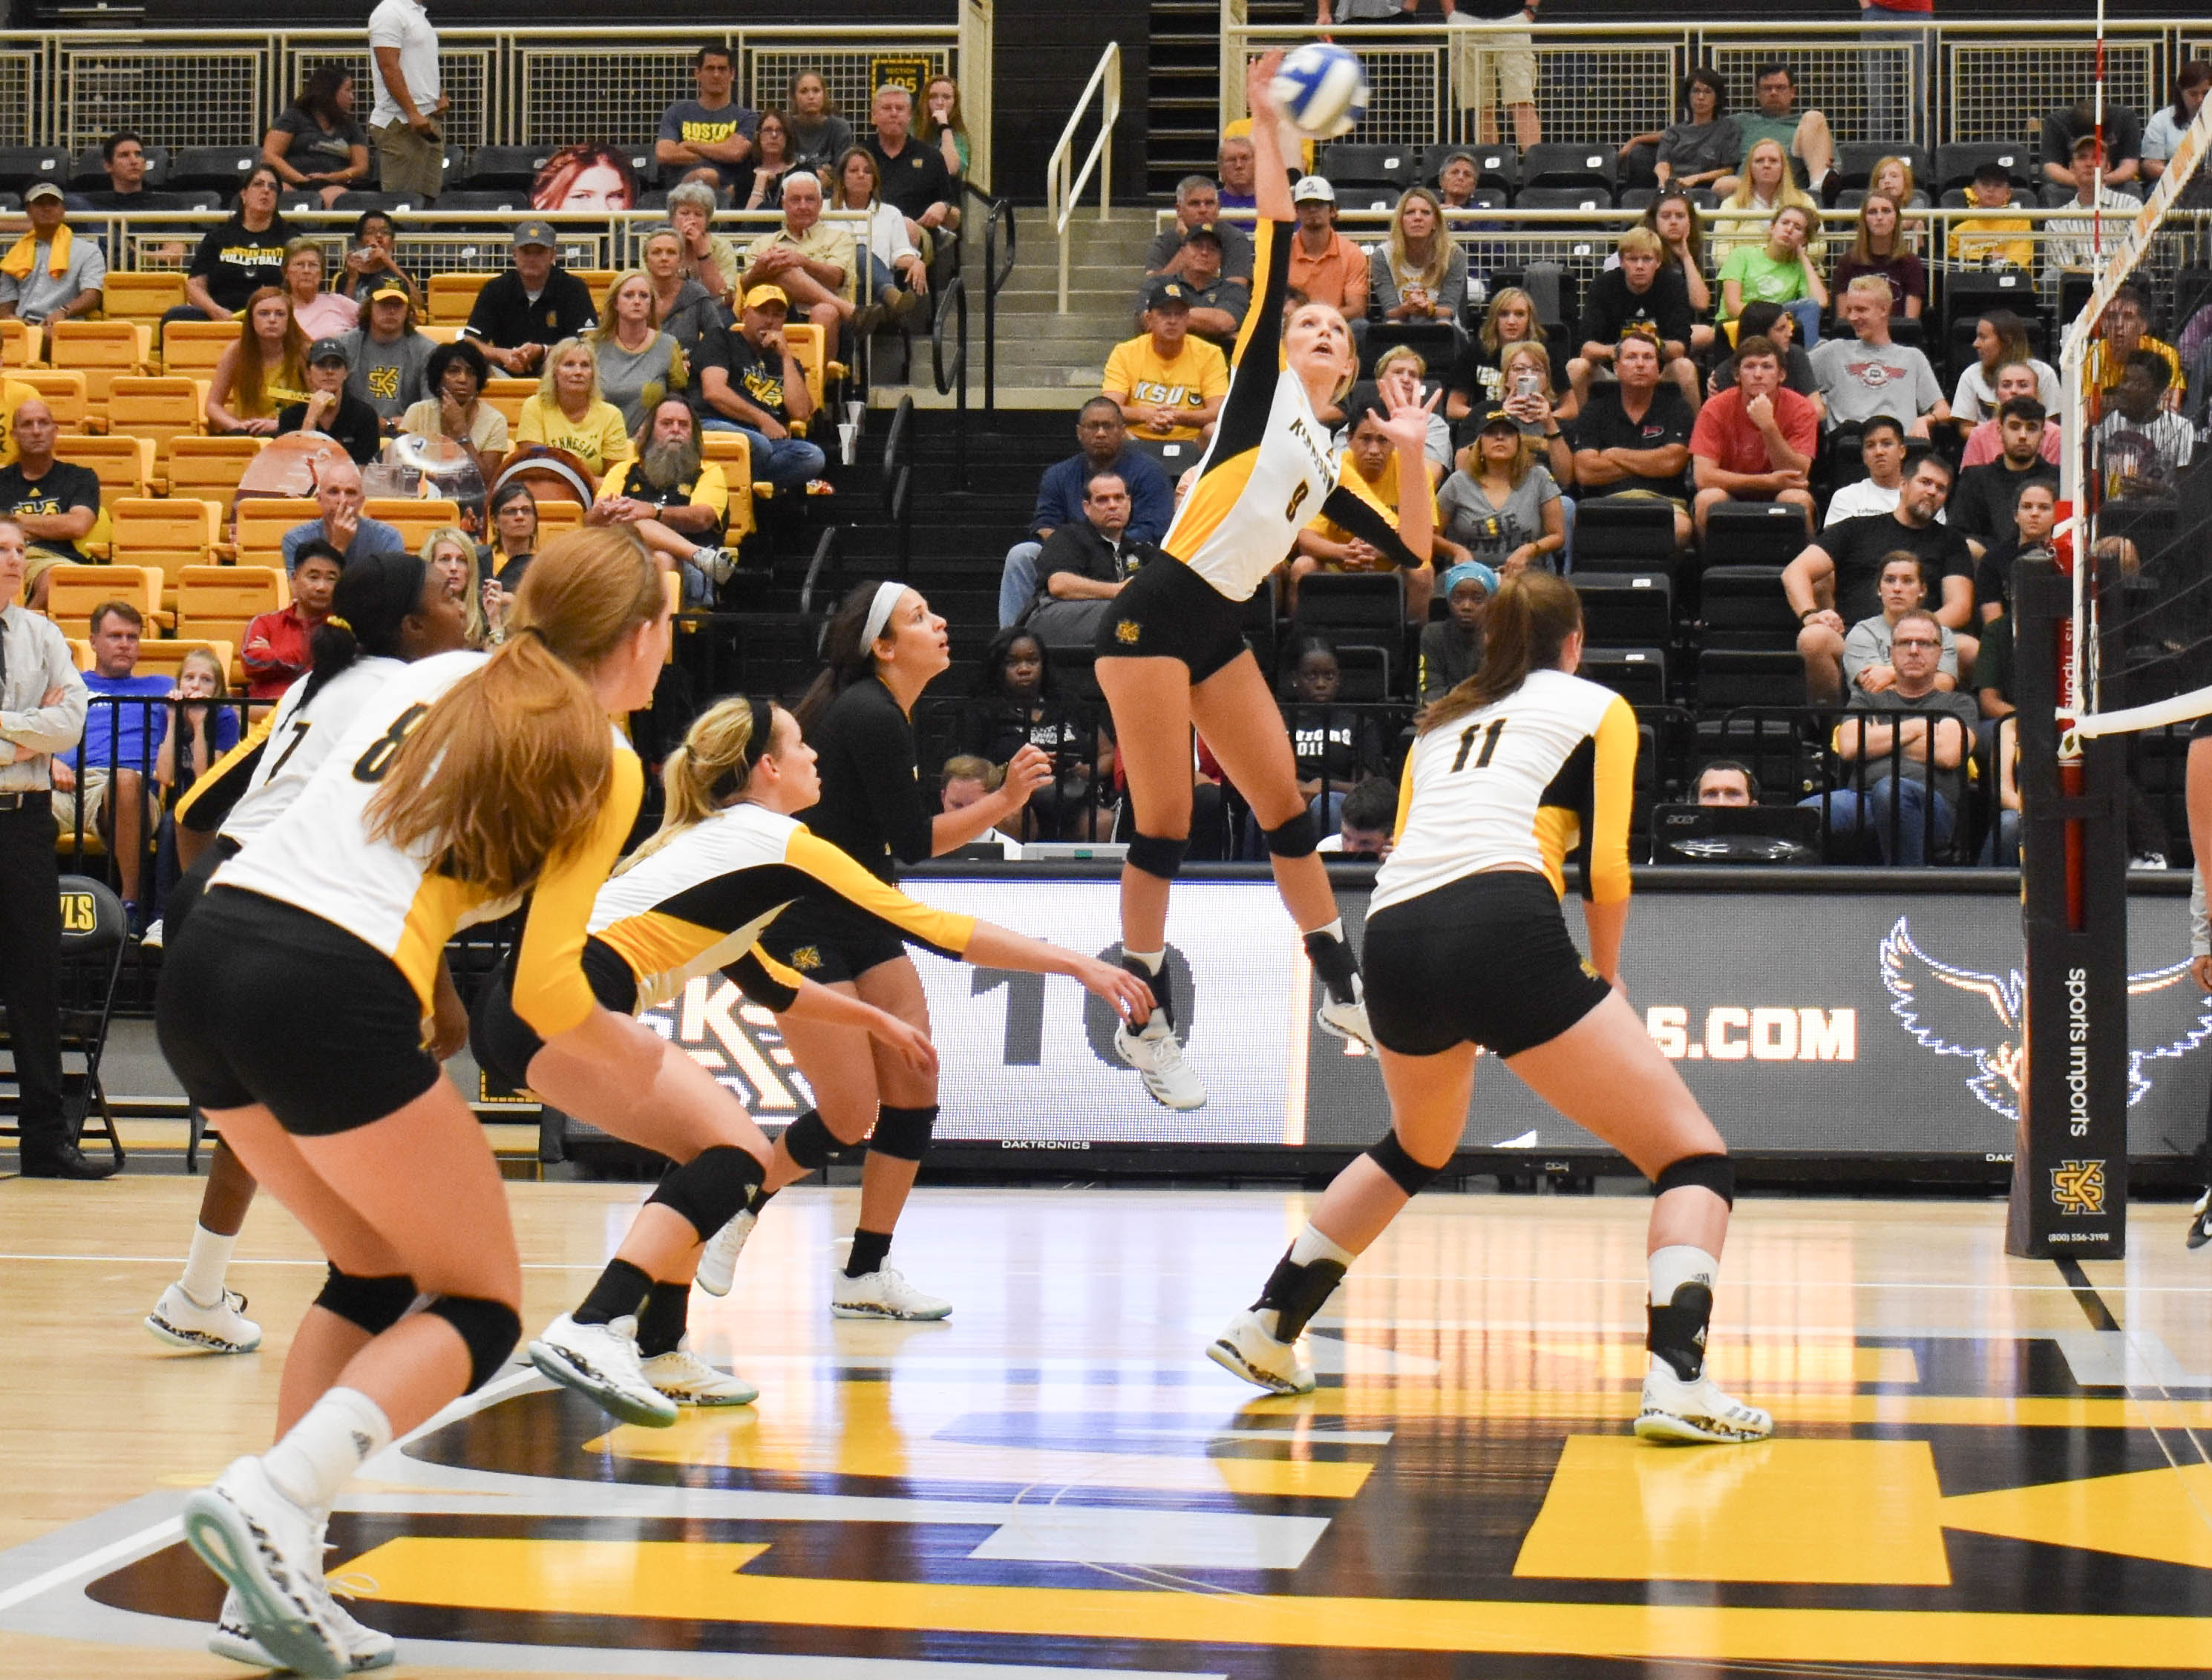 Consecutive sweeps for volleyball as ASUN slate begins